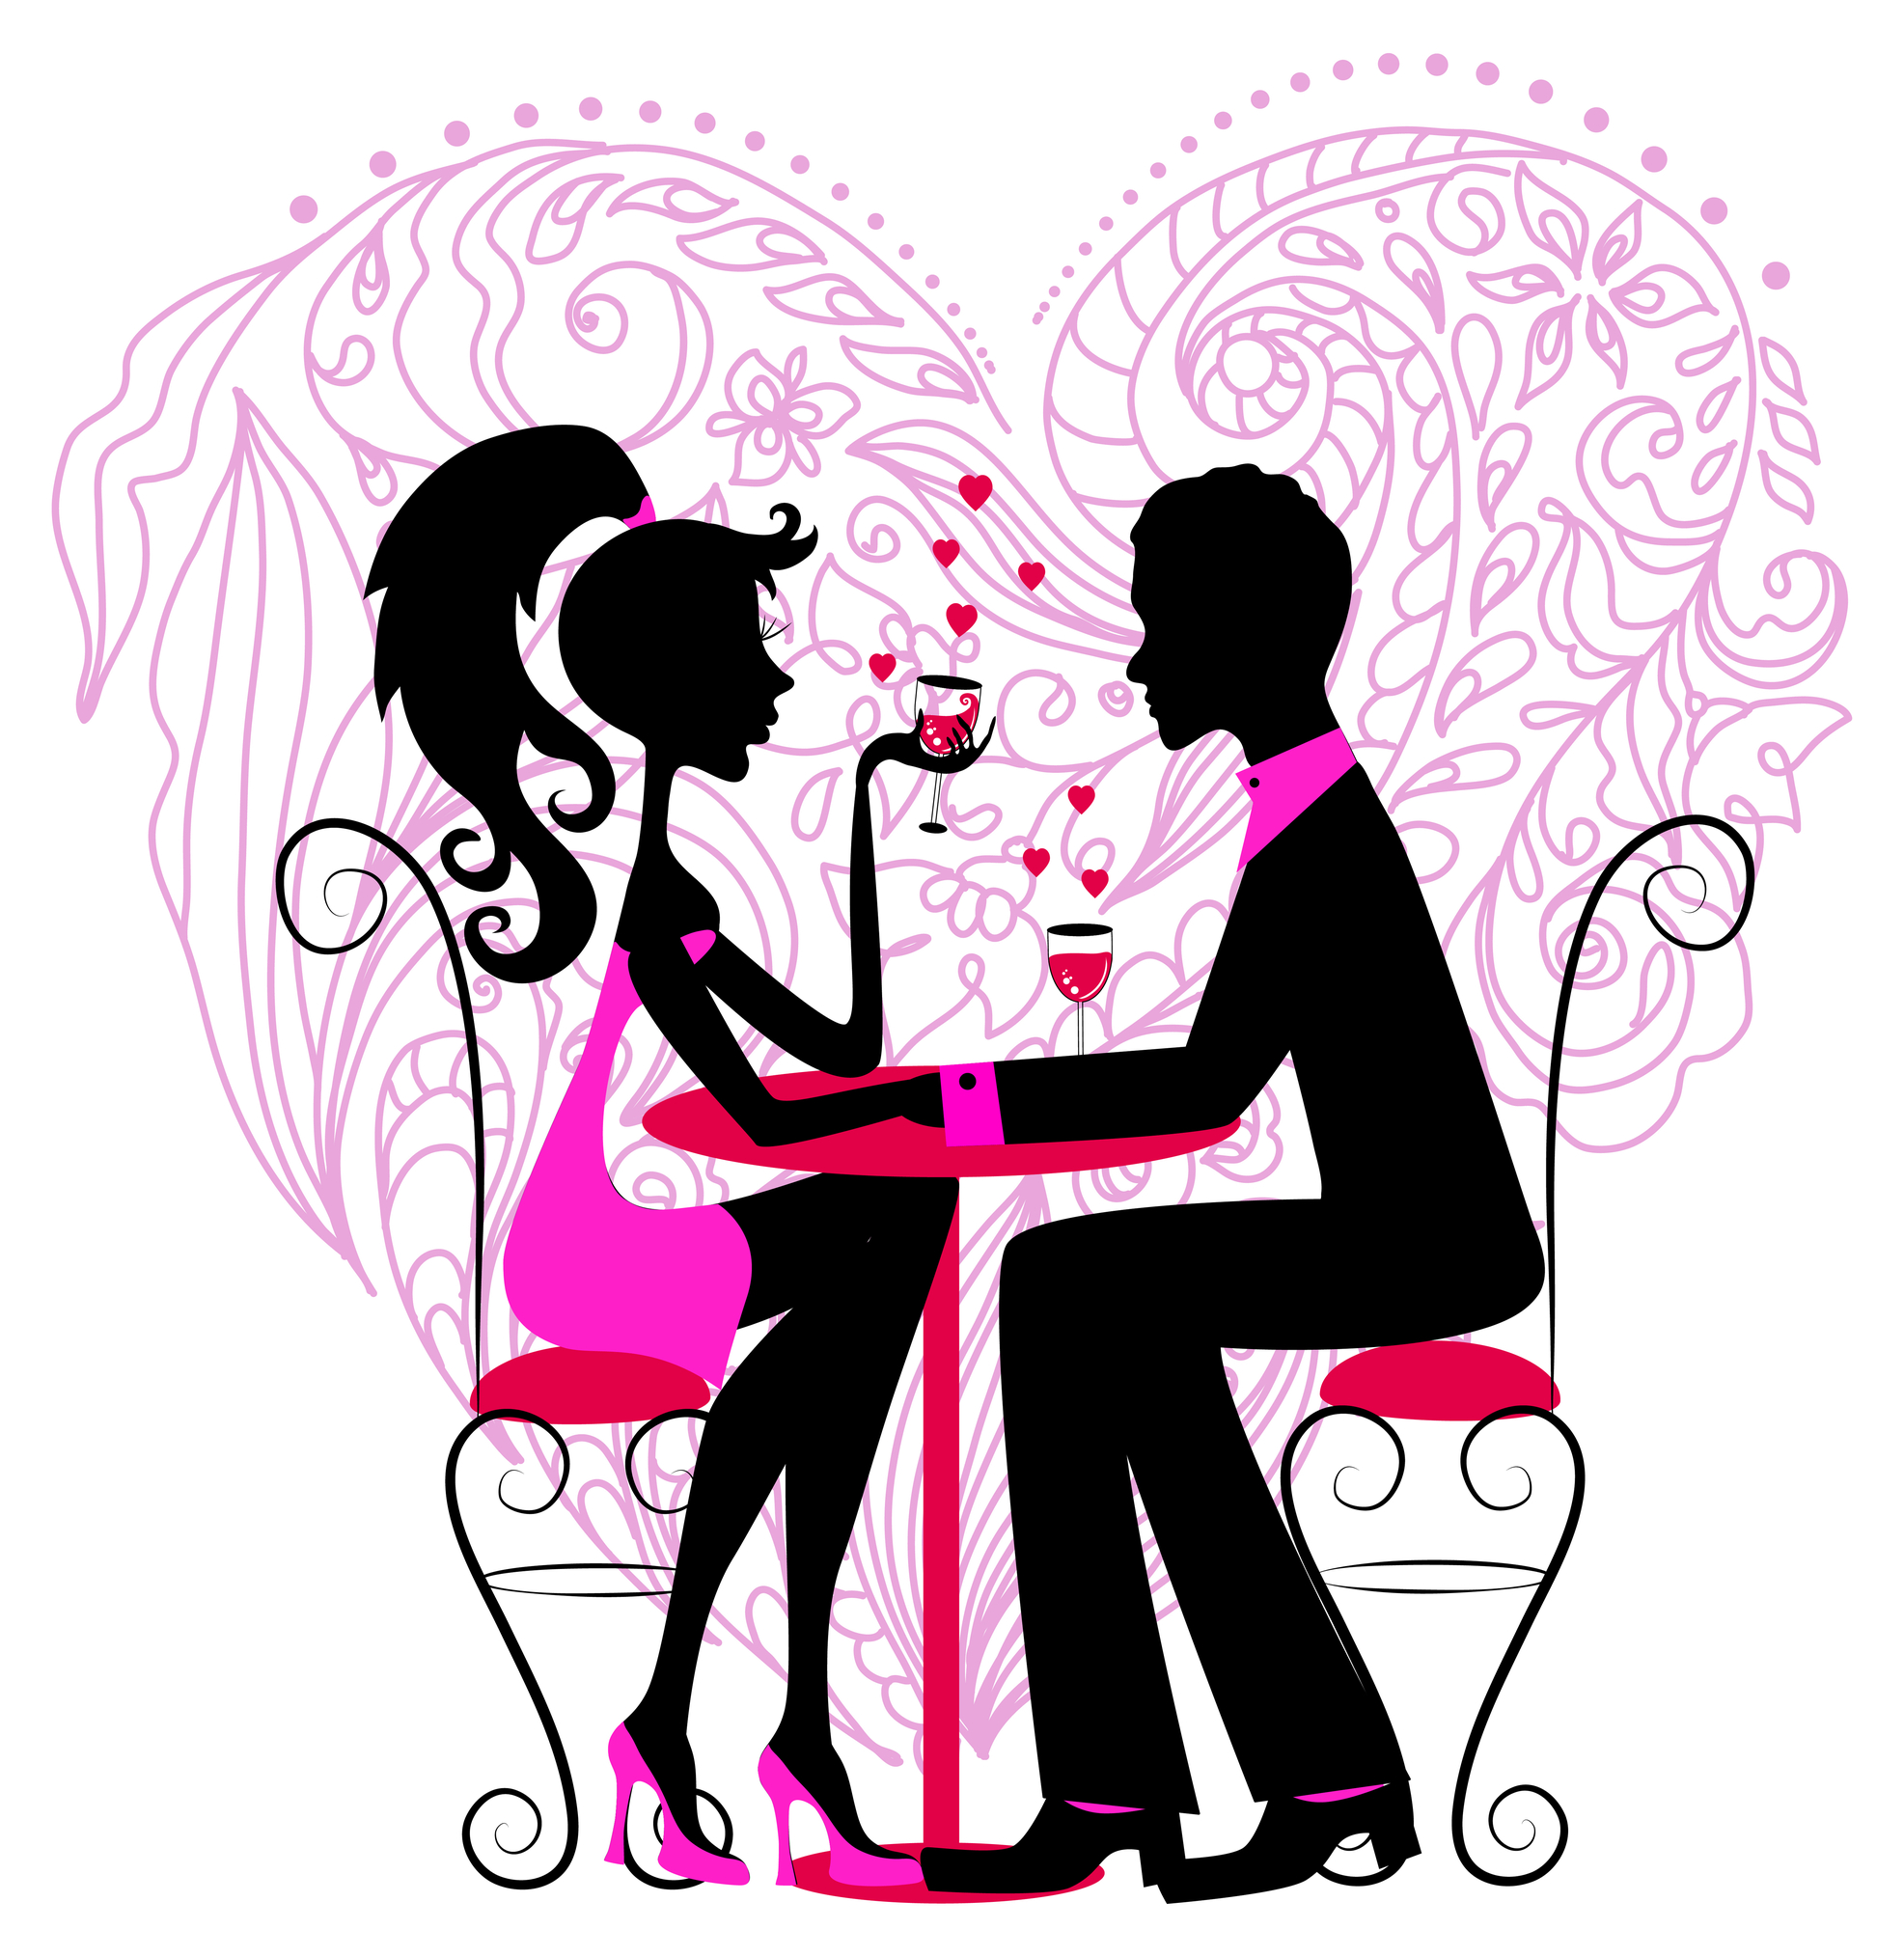 Silhouette Of The Romantic Couple Over Floral Heart For Valentine